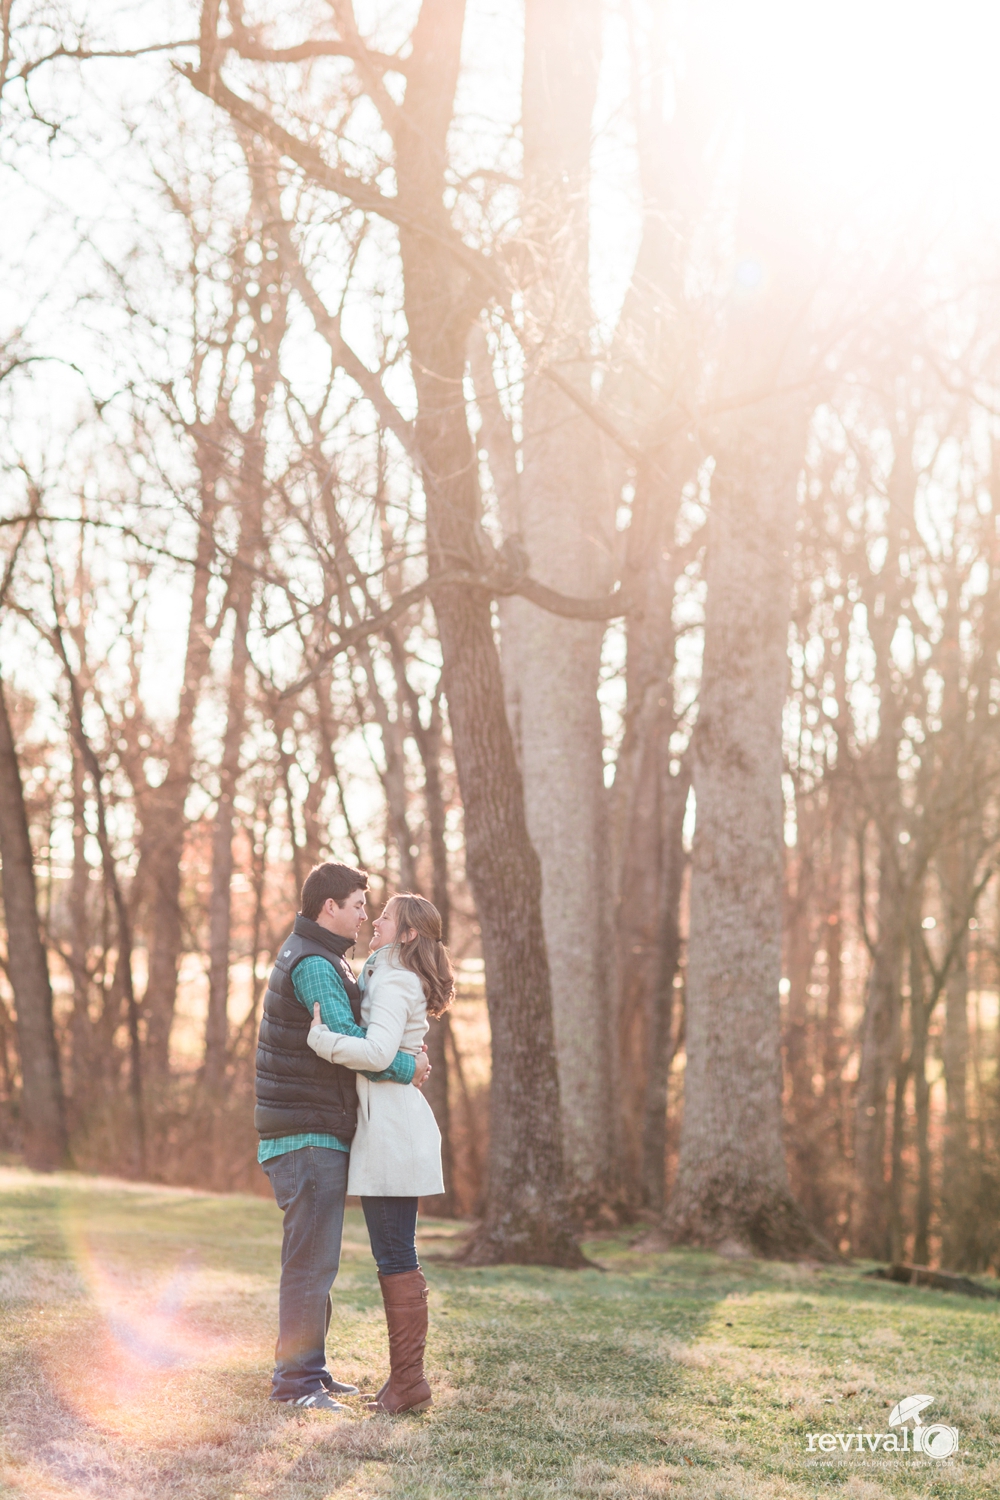 Photos by Revival Photography Winter Engagement Session at Tanglewood Park North Carolina NC Wedding Photographers www.revivalphotography.com